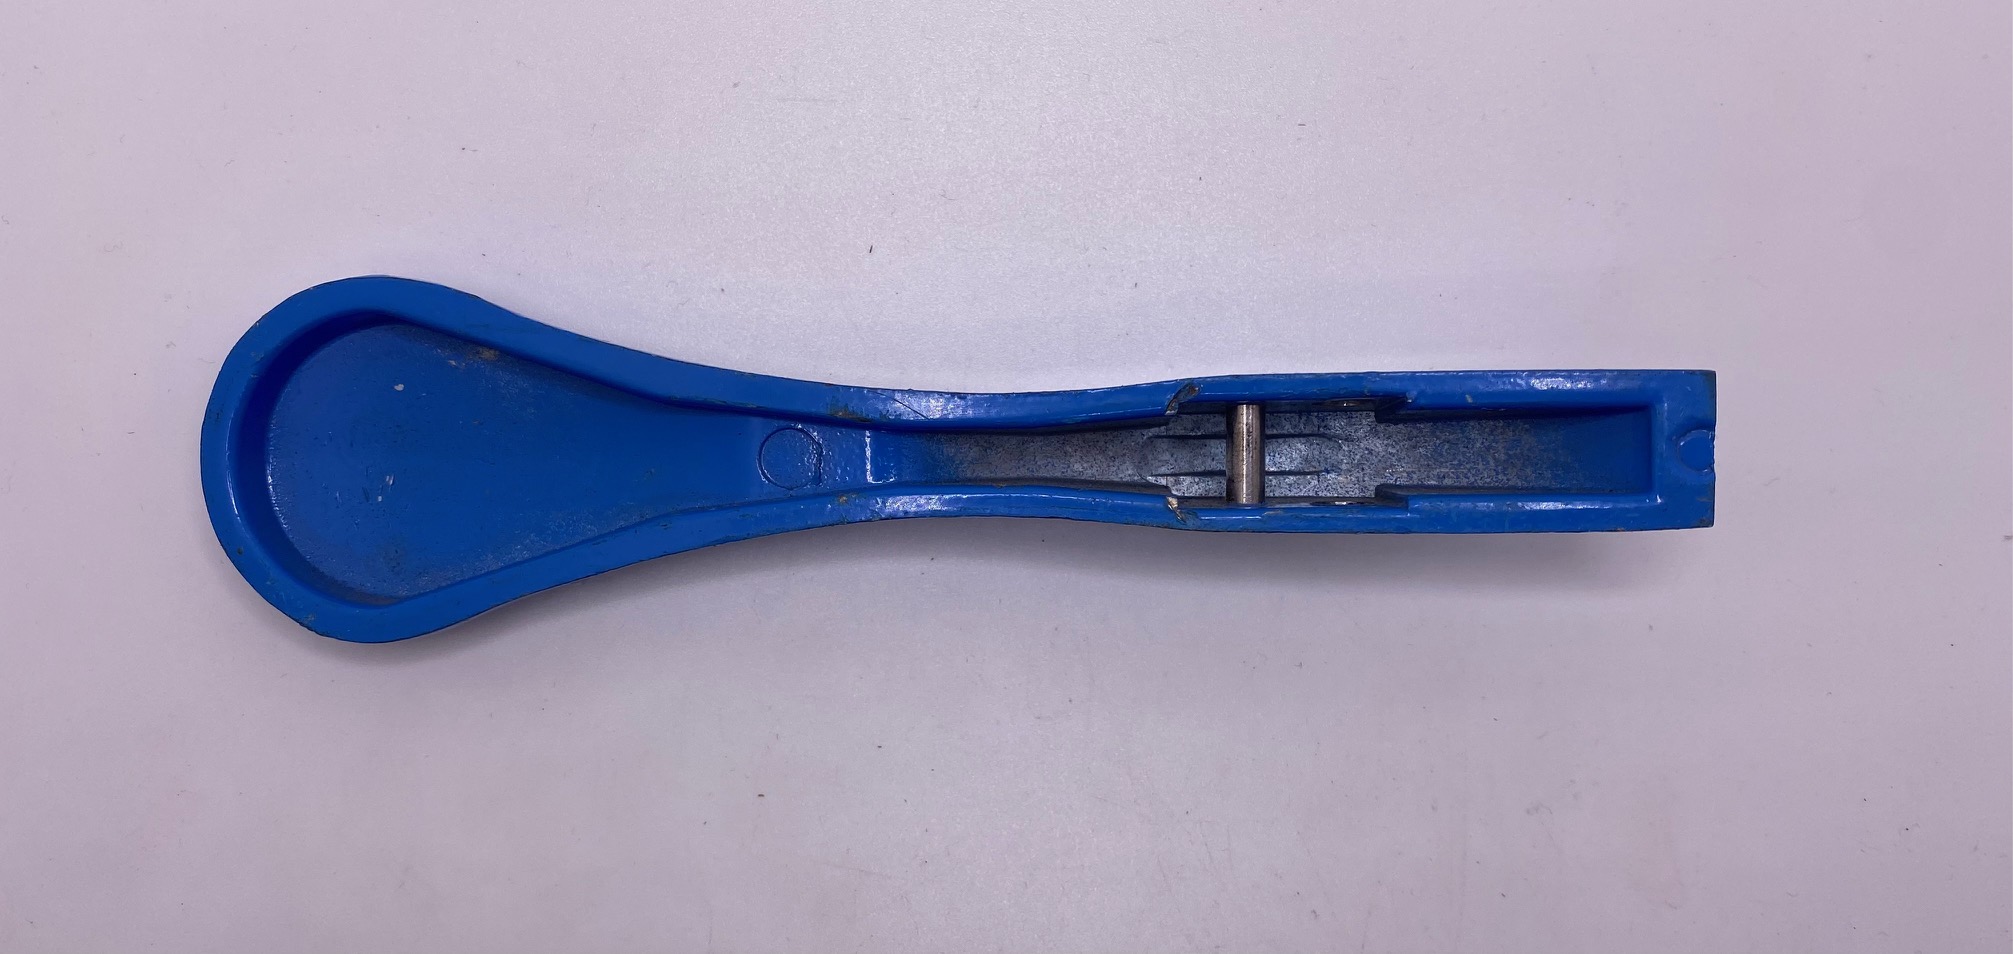 Ilco Exacta P20 Blue Punch handle (Very nice shape. Only 1!)